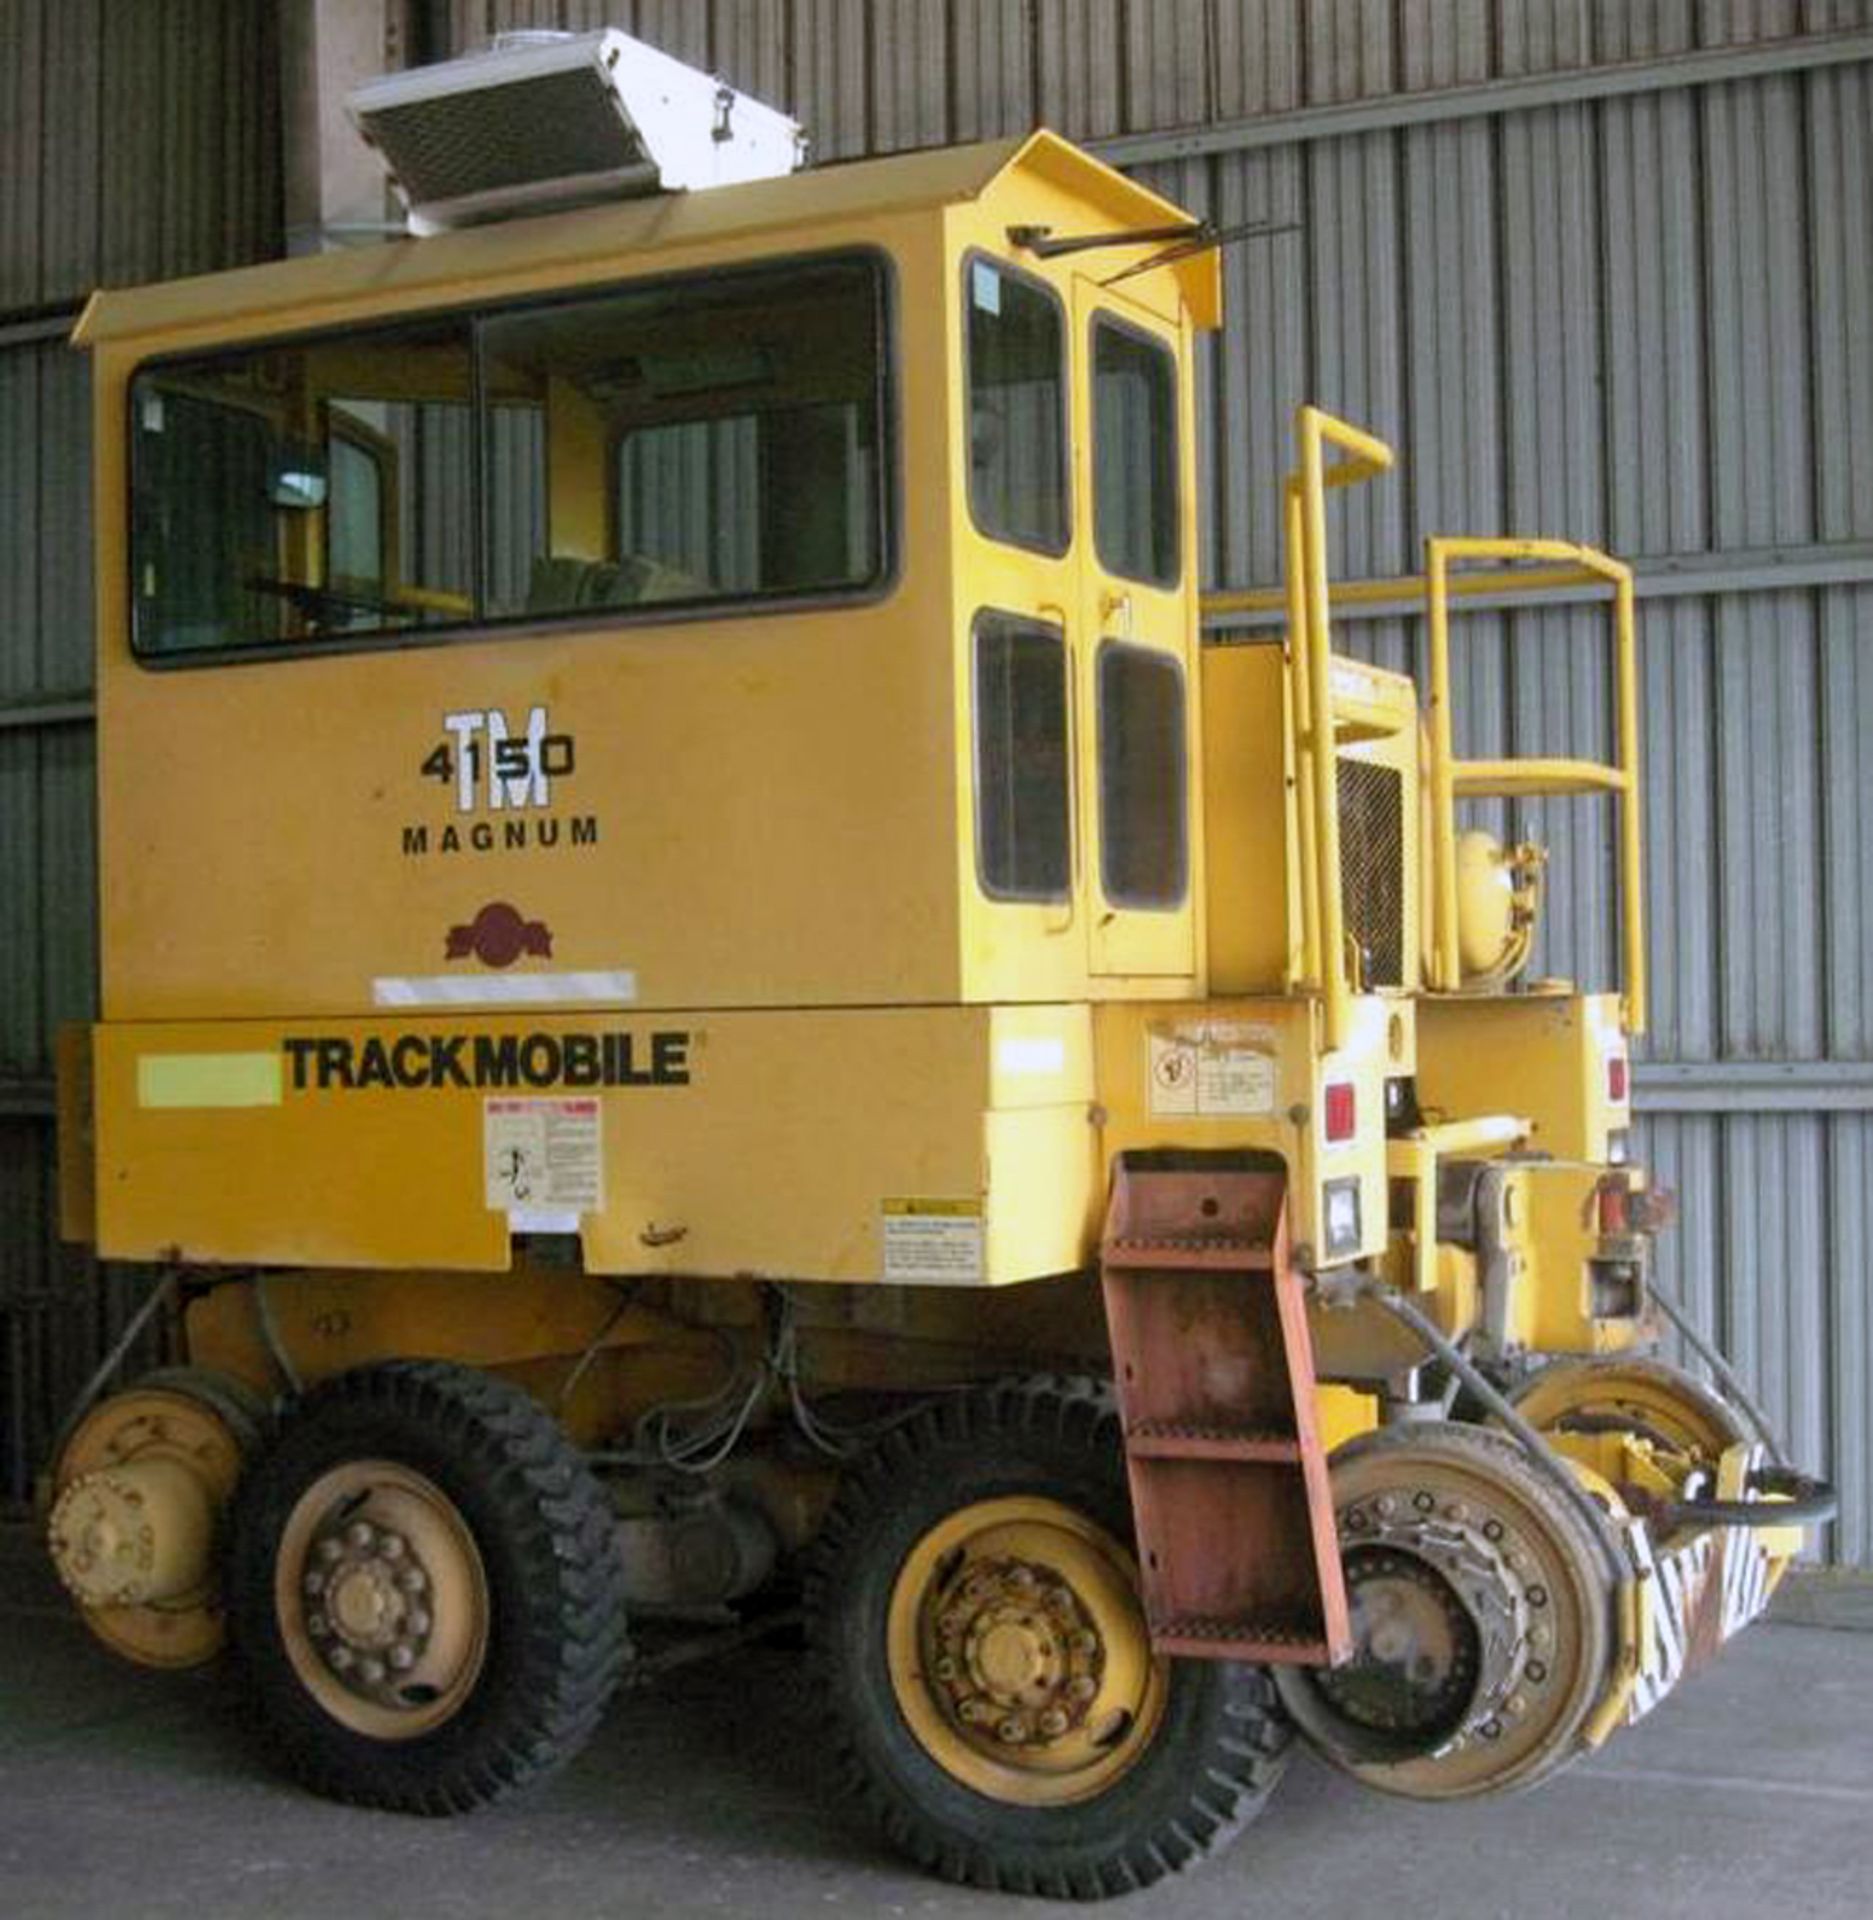 1998 Trackmobile Railcar Mover, Model: 4150, Serial #: LGN 971460898, Approx. Hours On Meter: 4163 - Image 8 of 10